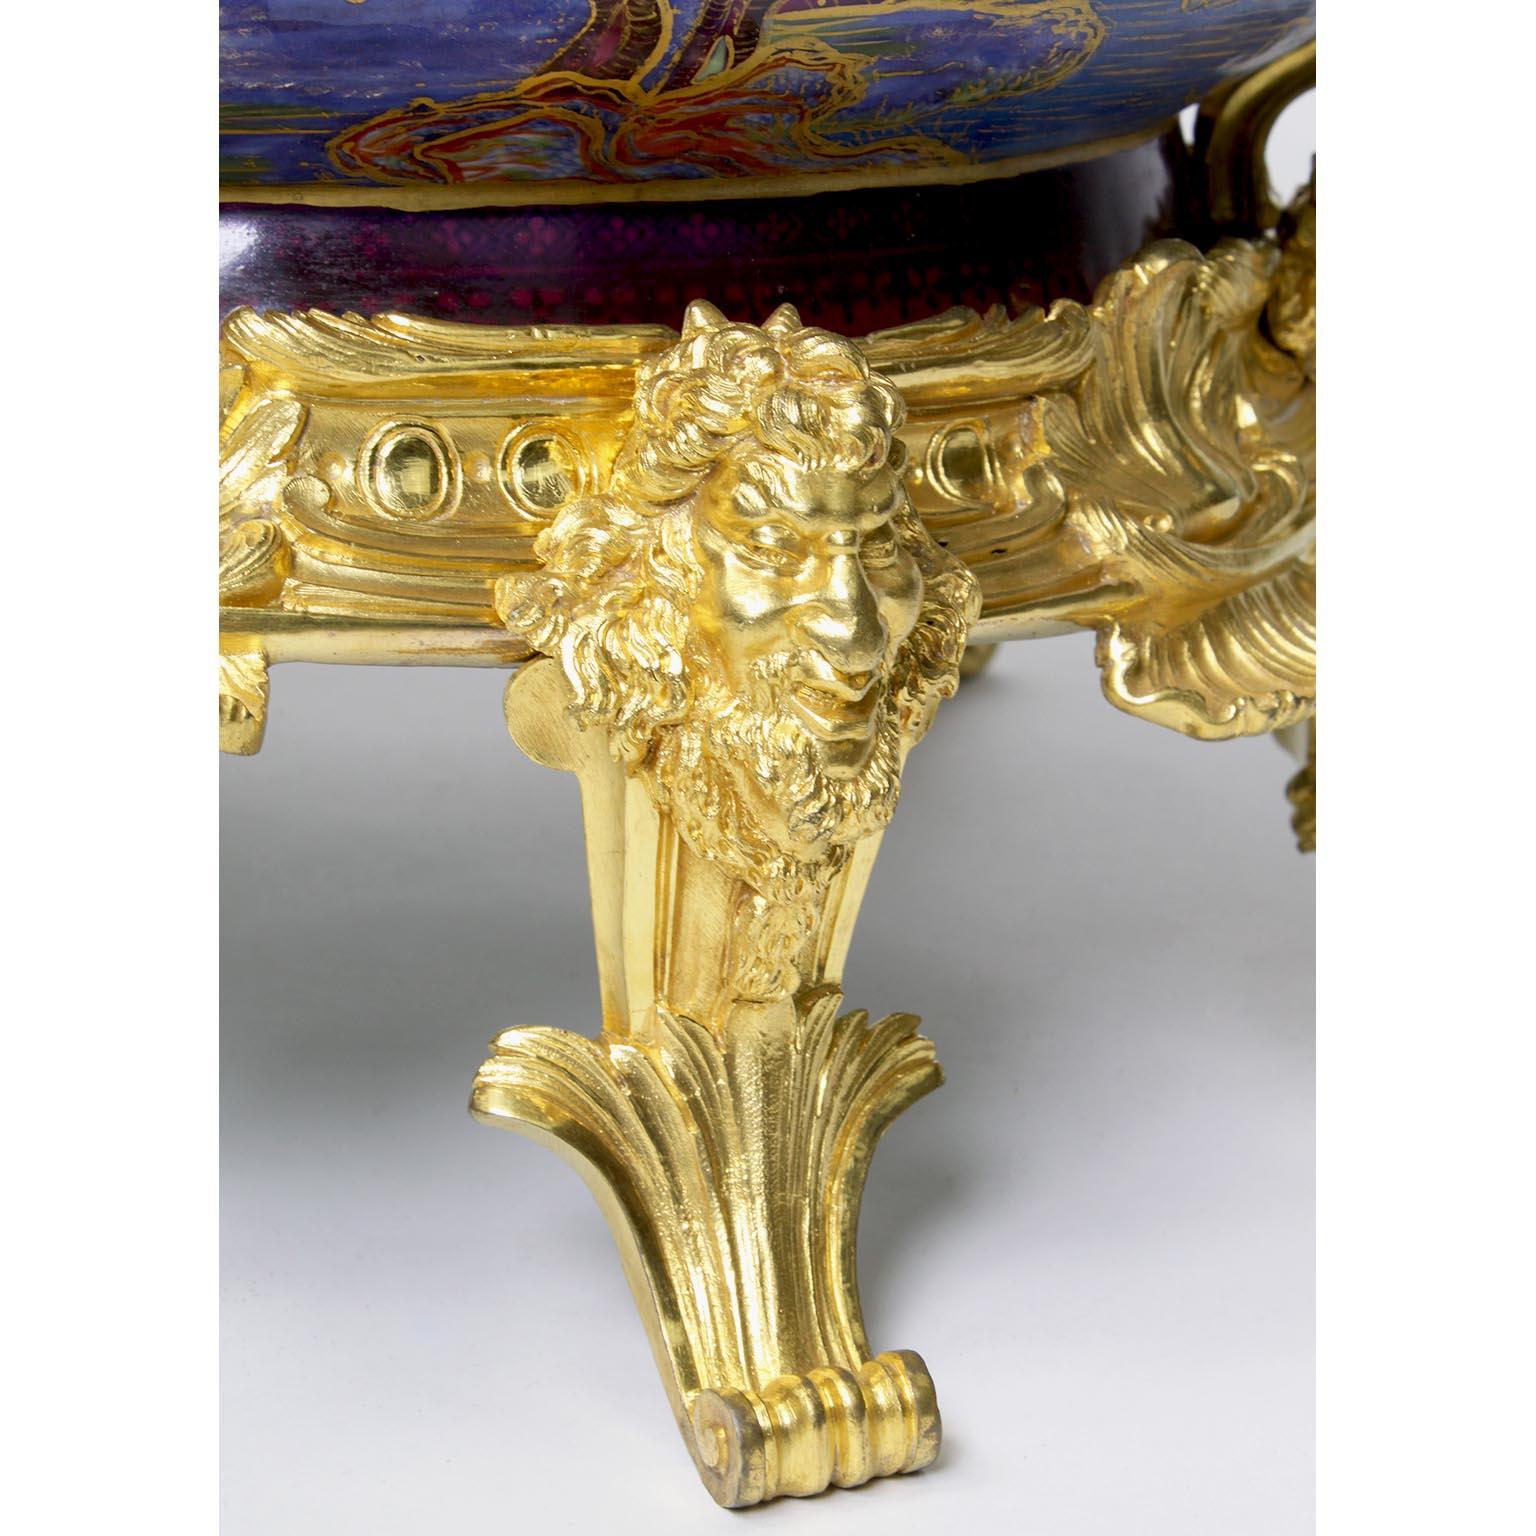 Chinese Export Famille Verte Porcelain & French Ormolu Chinoiserie Centerpiece For Sale 3